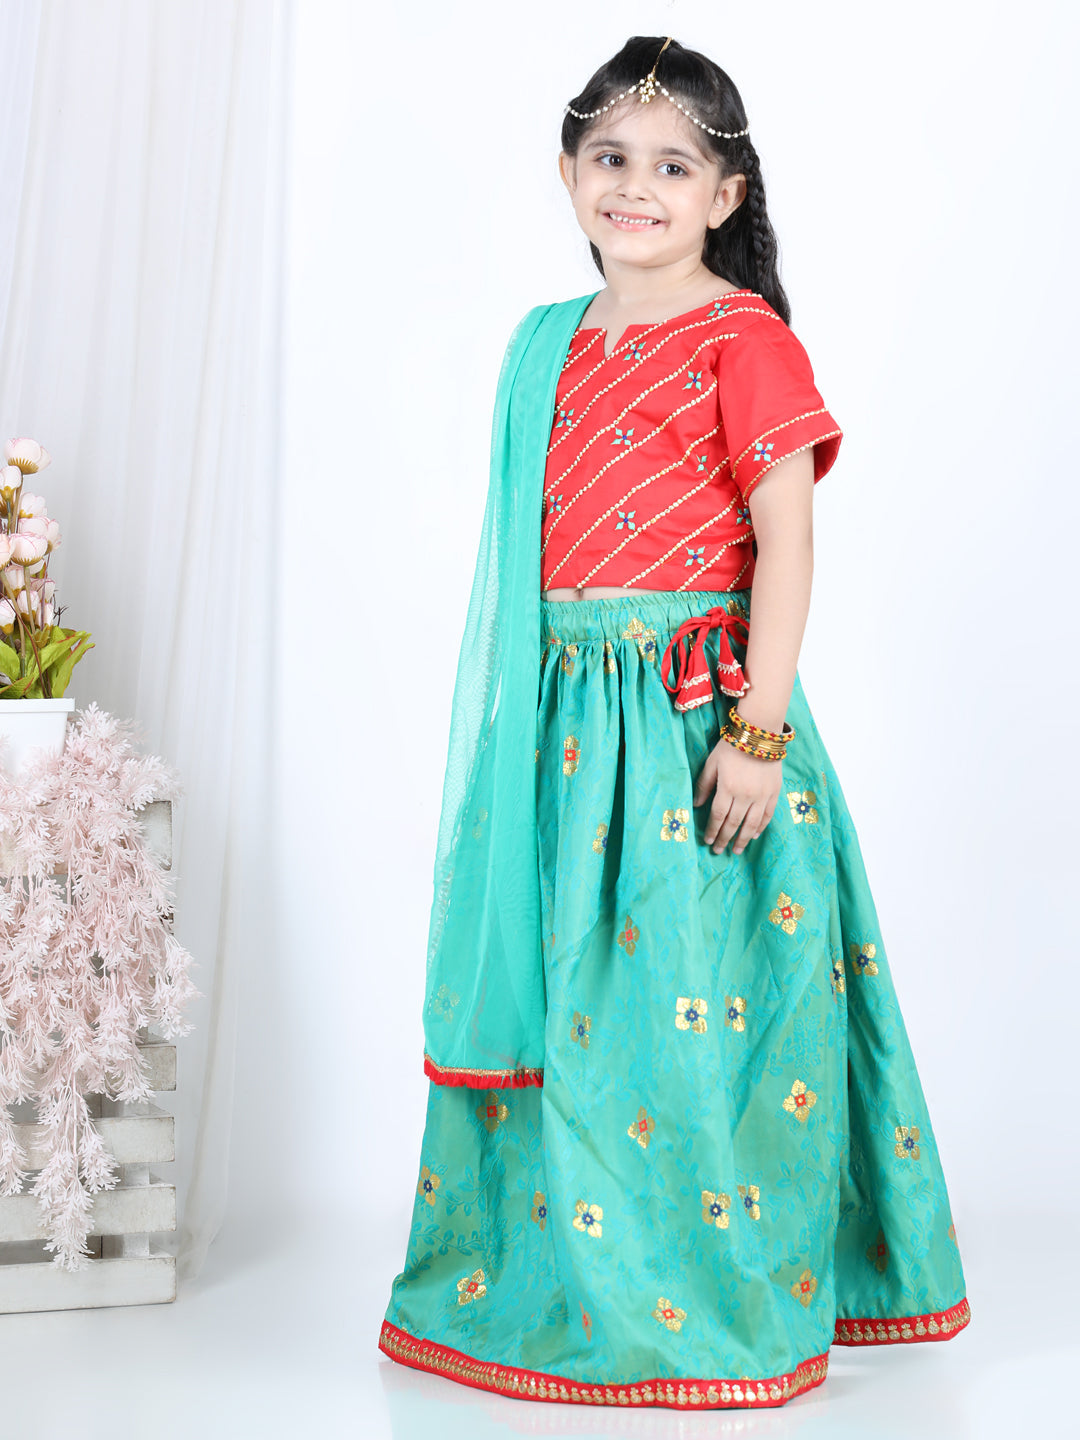 Red brocade top with green lehenga and dupatta